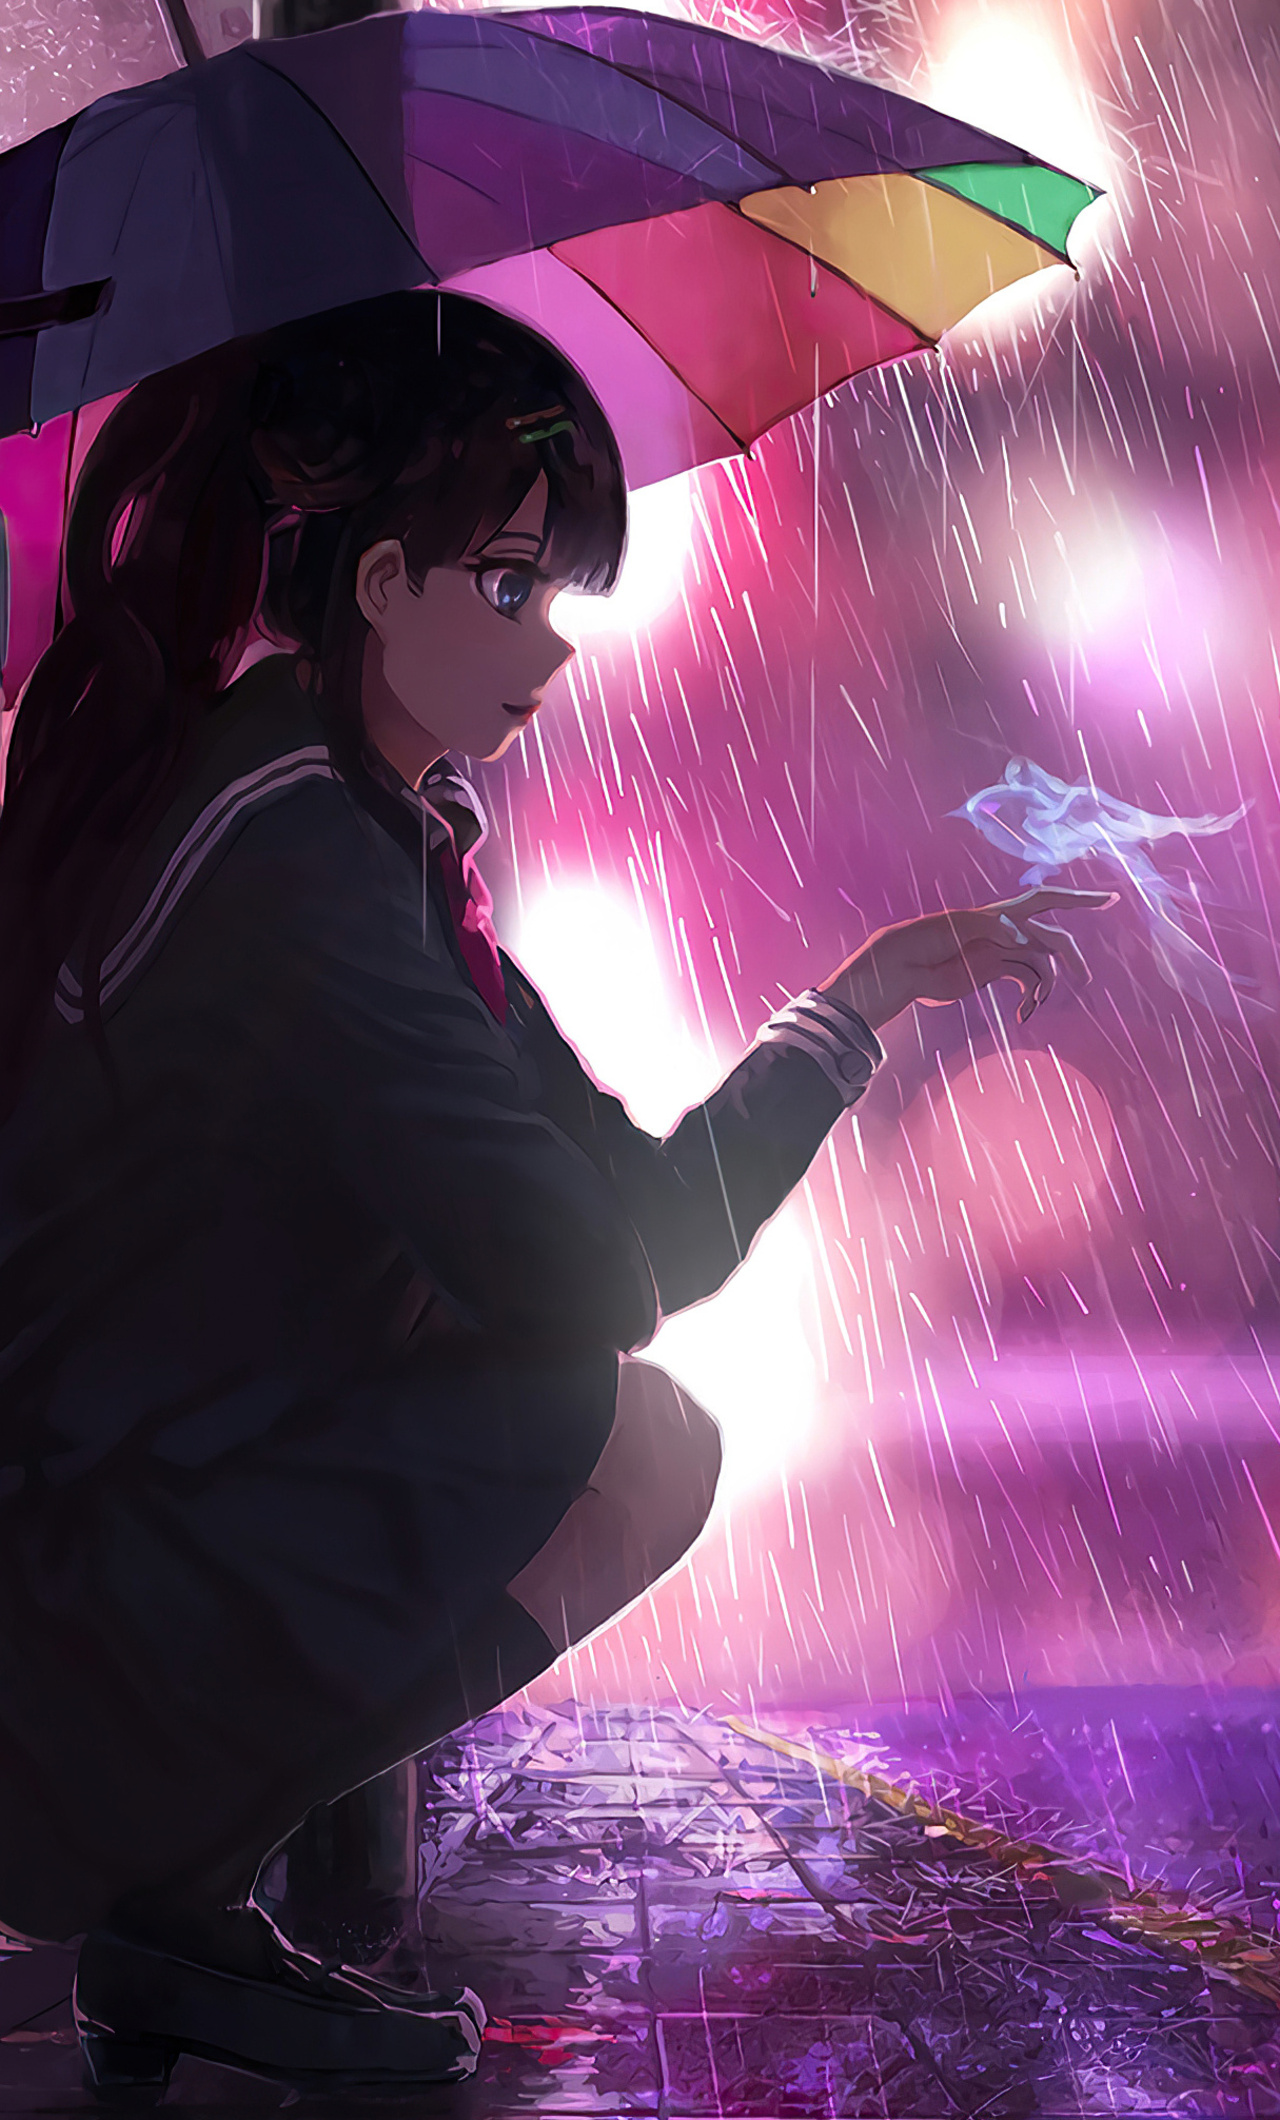 1280x2120 Umbrella Rain Anime Girl 4k iPhone 6+ HD 4k Wallpapers, Images,  Backgrounds, Photos and Pictures